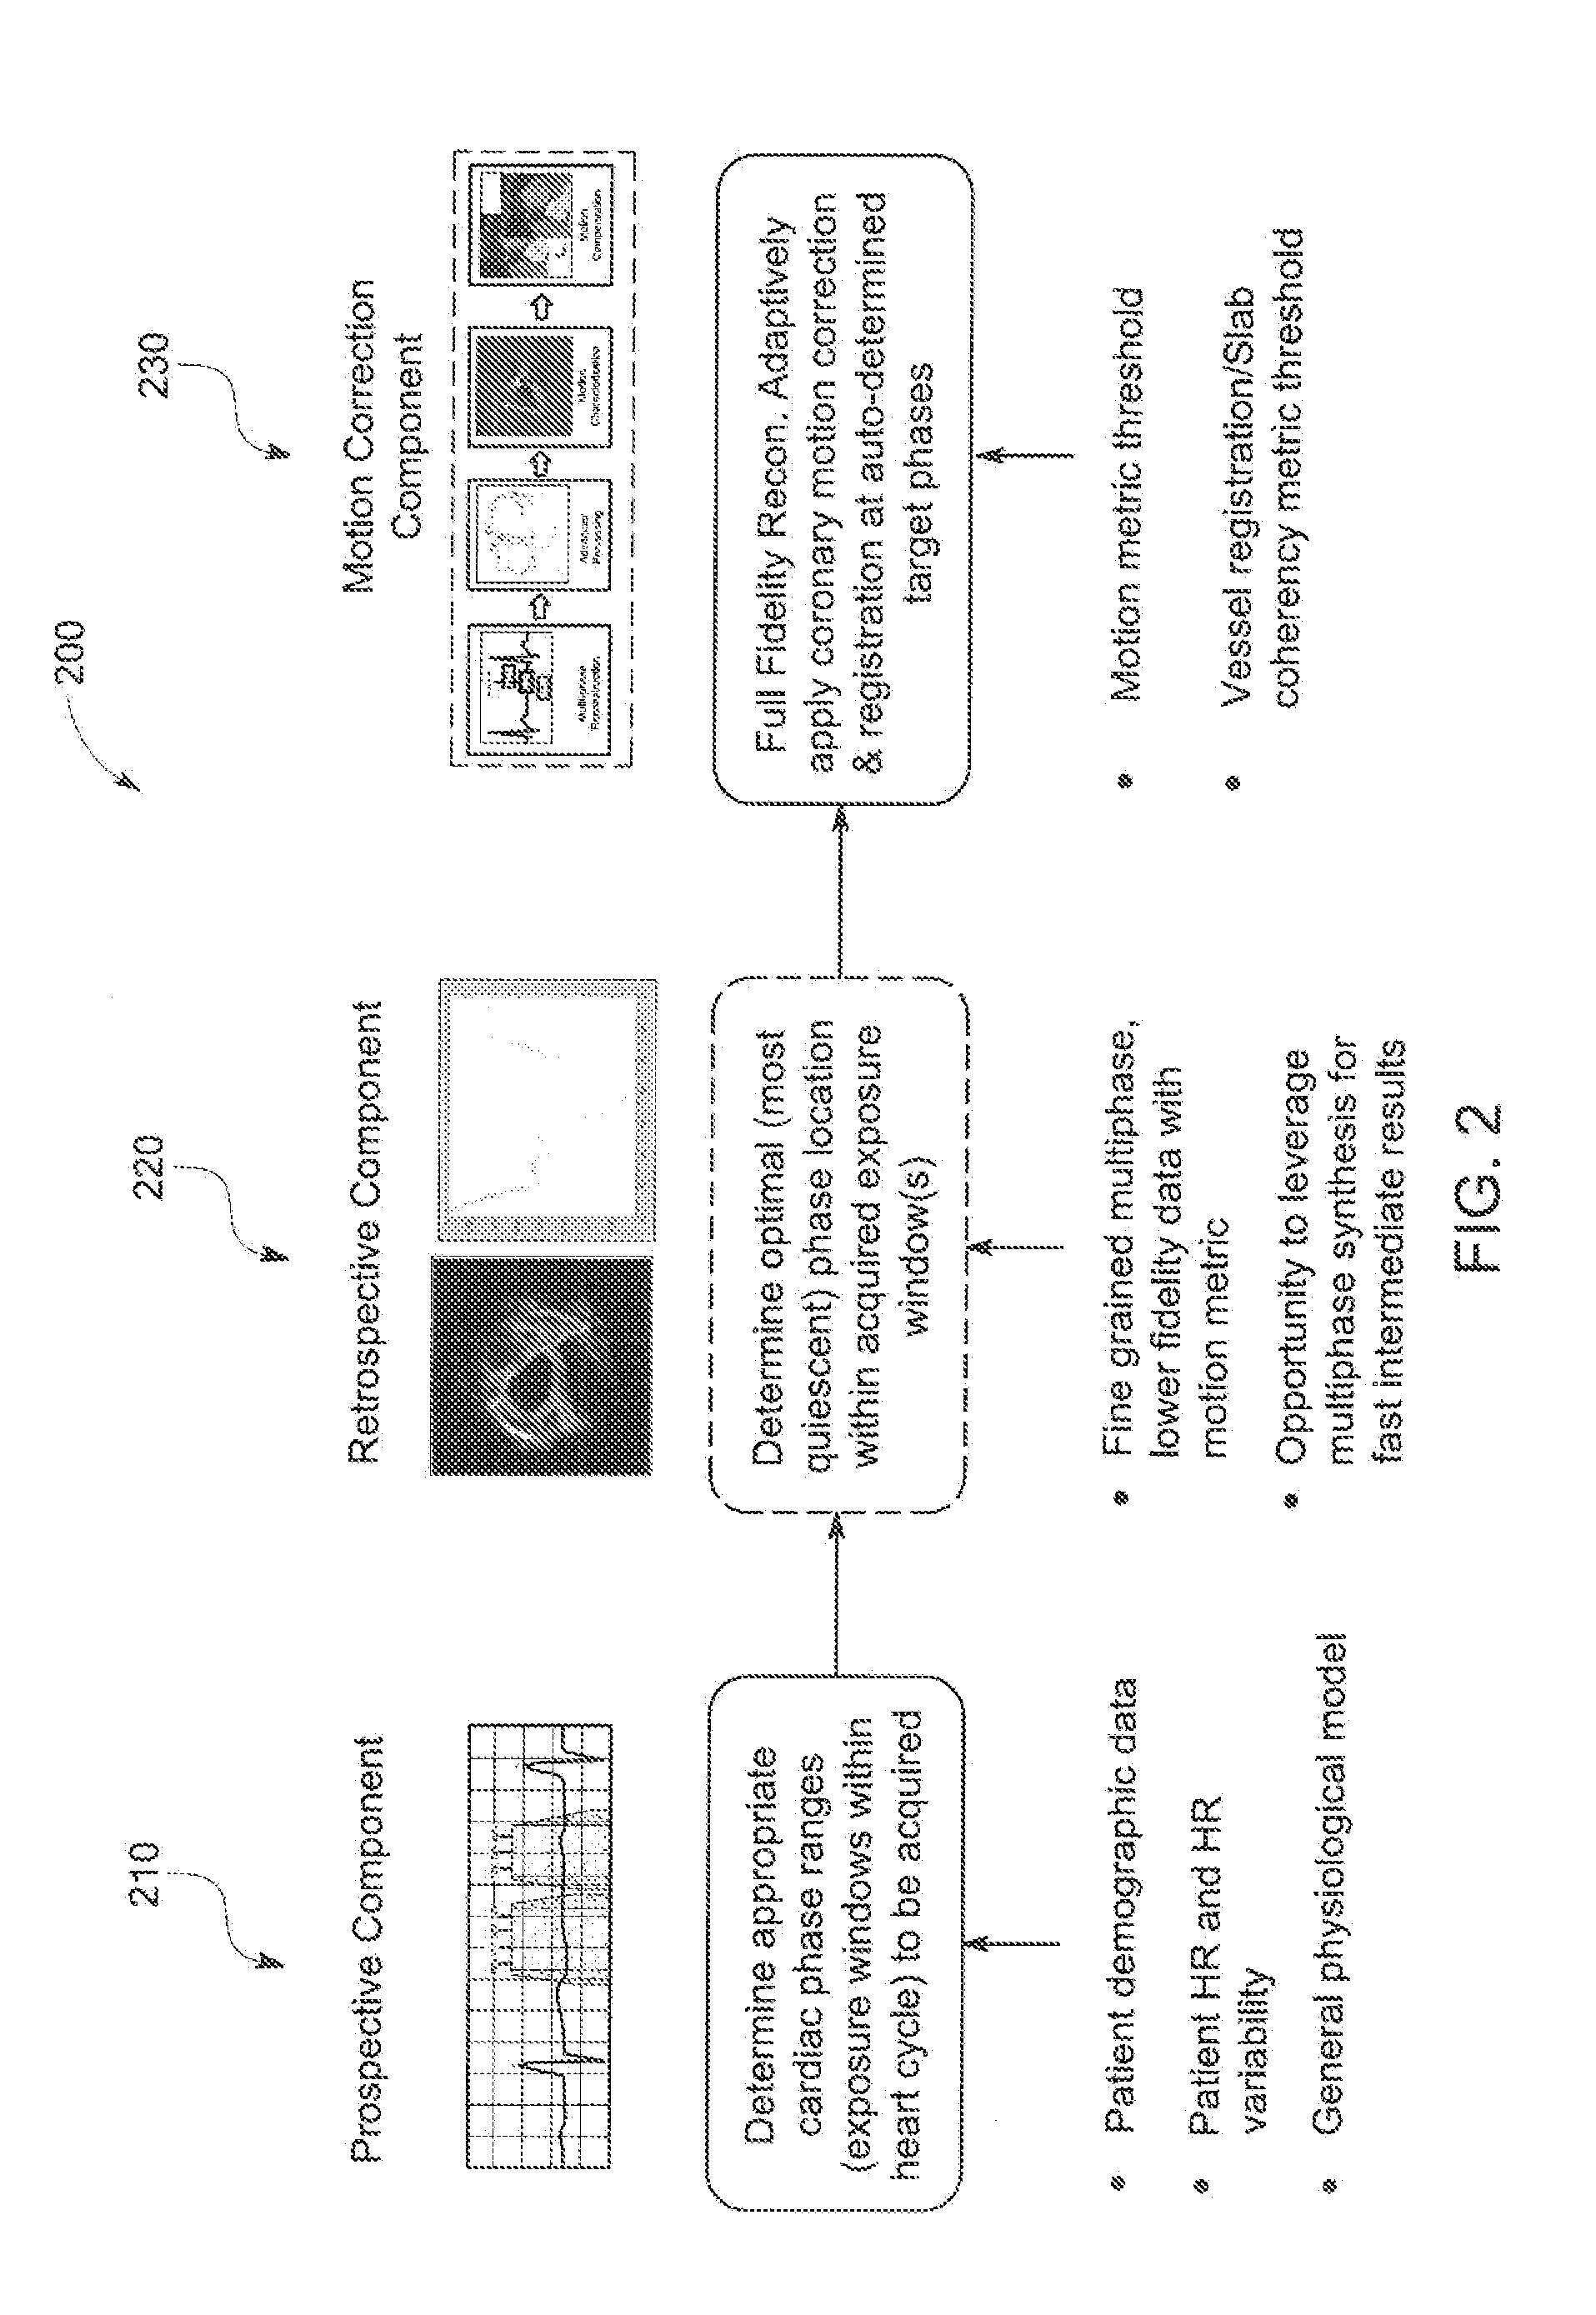 Systems and methods for coronary imaging